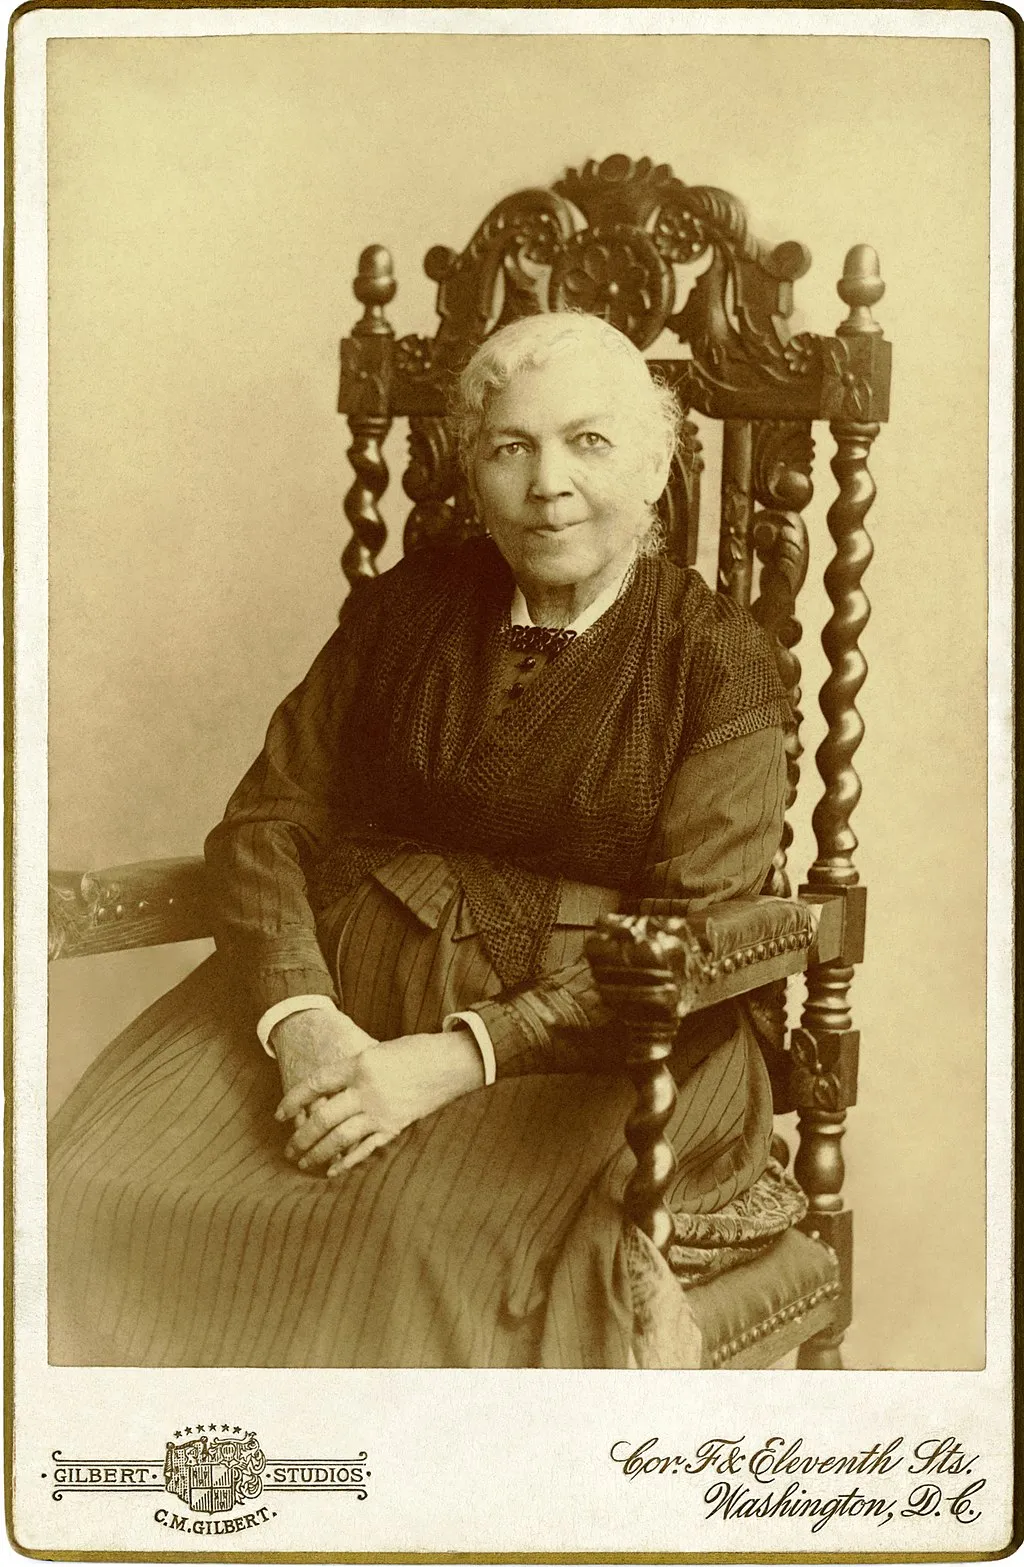 An 1894 photograph of Harriet Jacobs, who hid in an attic for nearly seven years after escaping enslavement